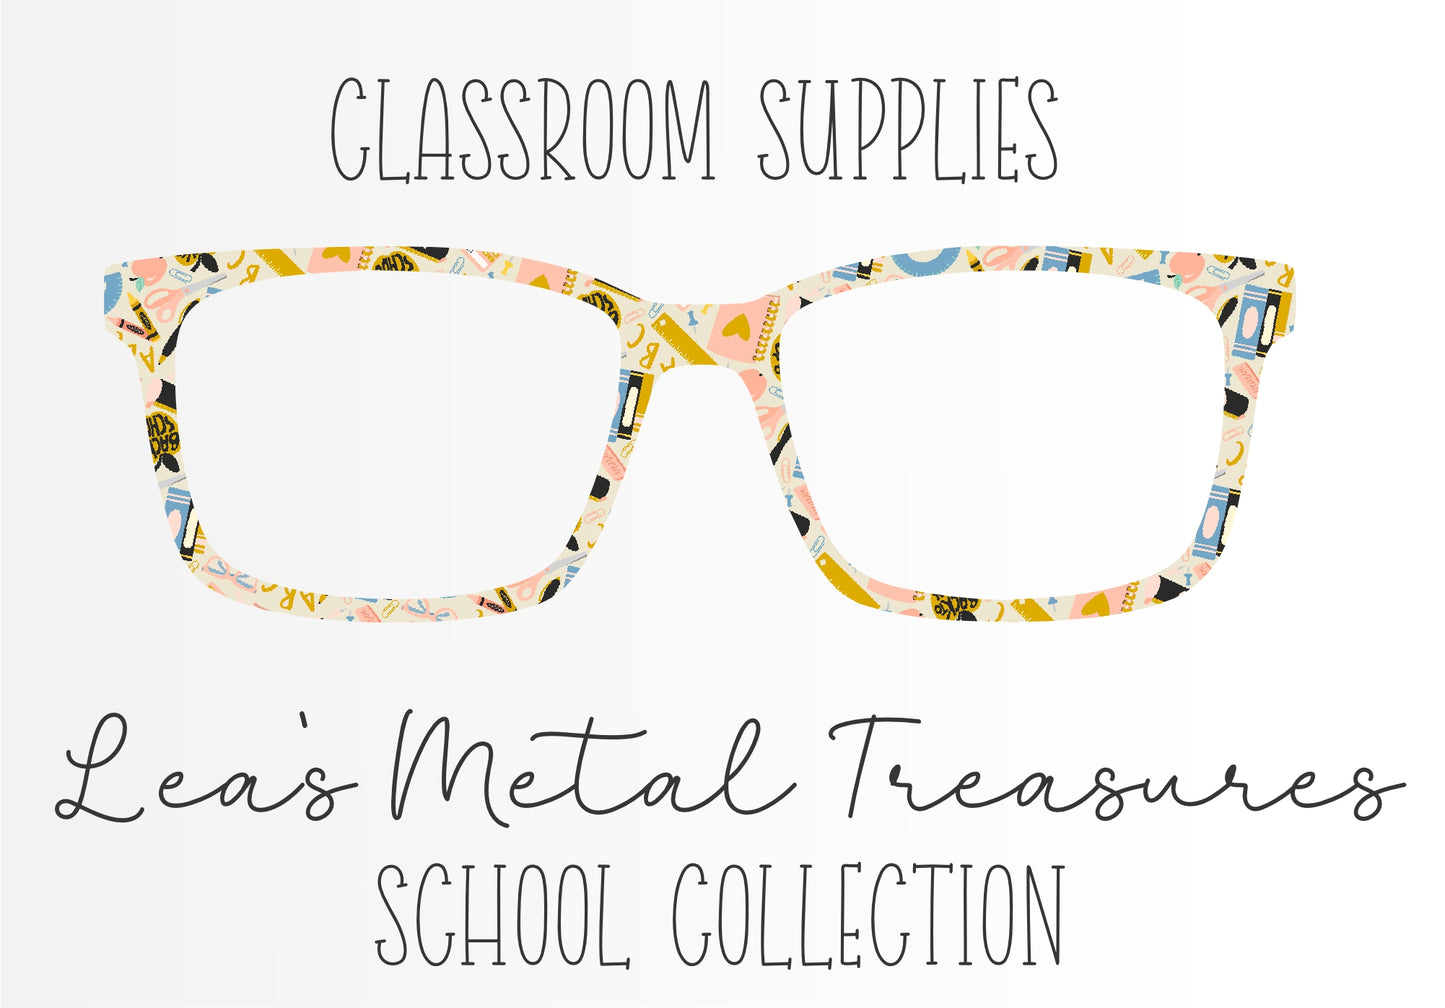 CLASSROOM SUPPLIES Eyewear Frame Toppers COMES WITH MAGNETS